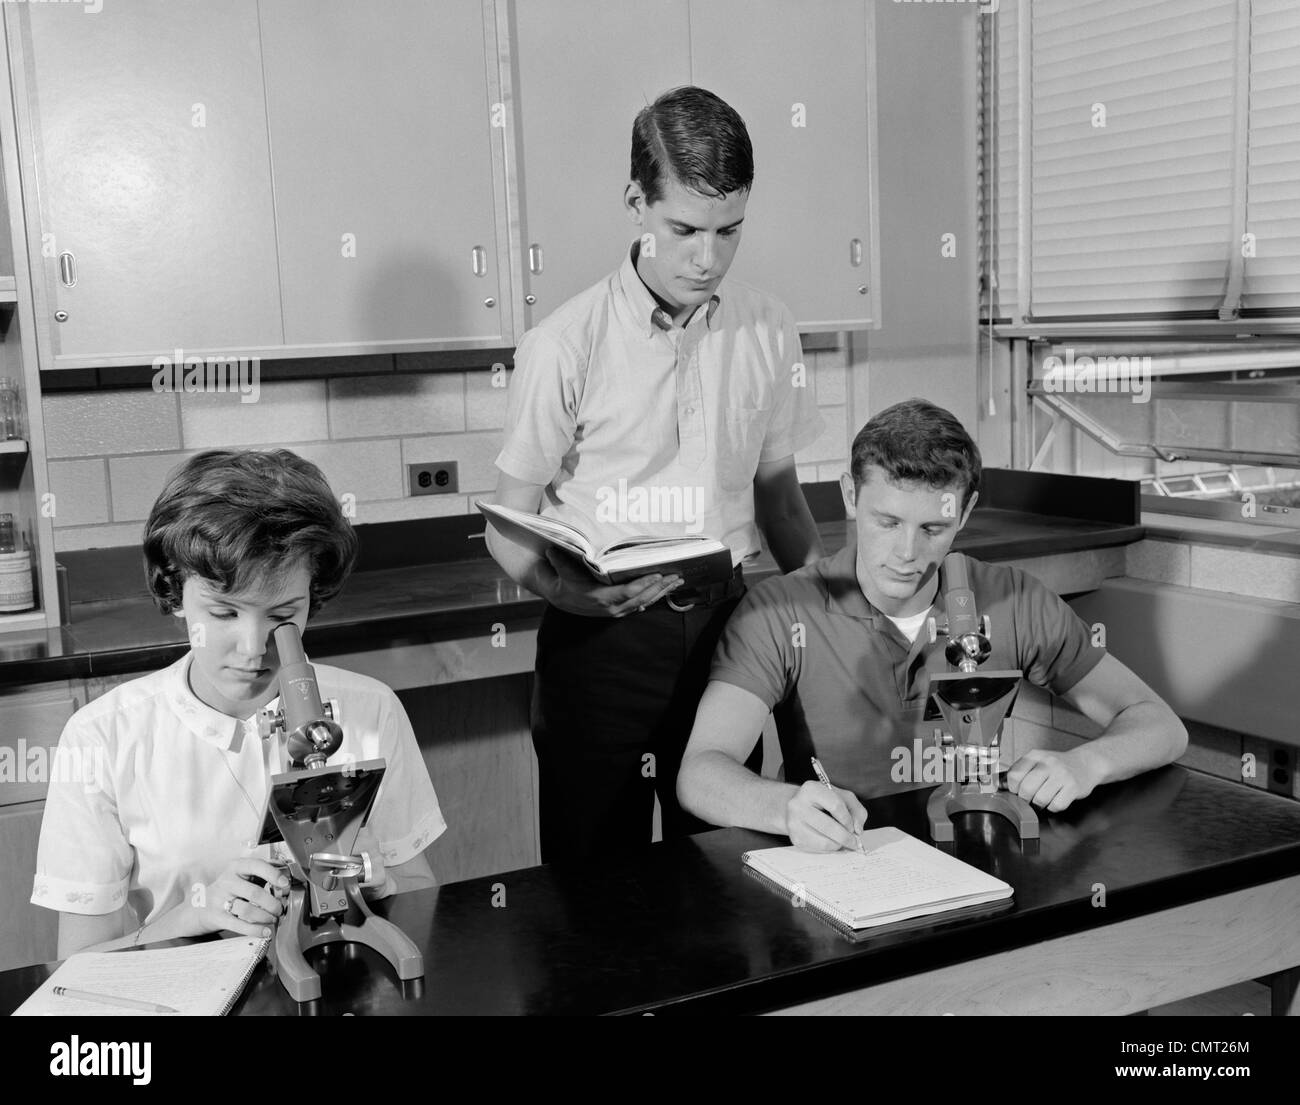 1960s THREE STUDENTS USING MICROSCOPES TWO BOYS ONE GIRL INDOOR HIGH SCHOOL Stock Photo